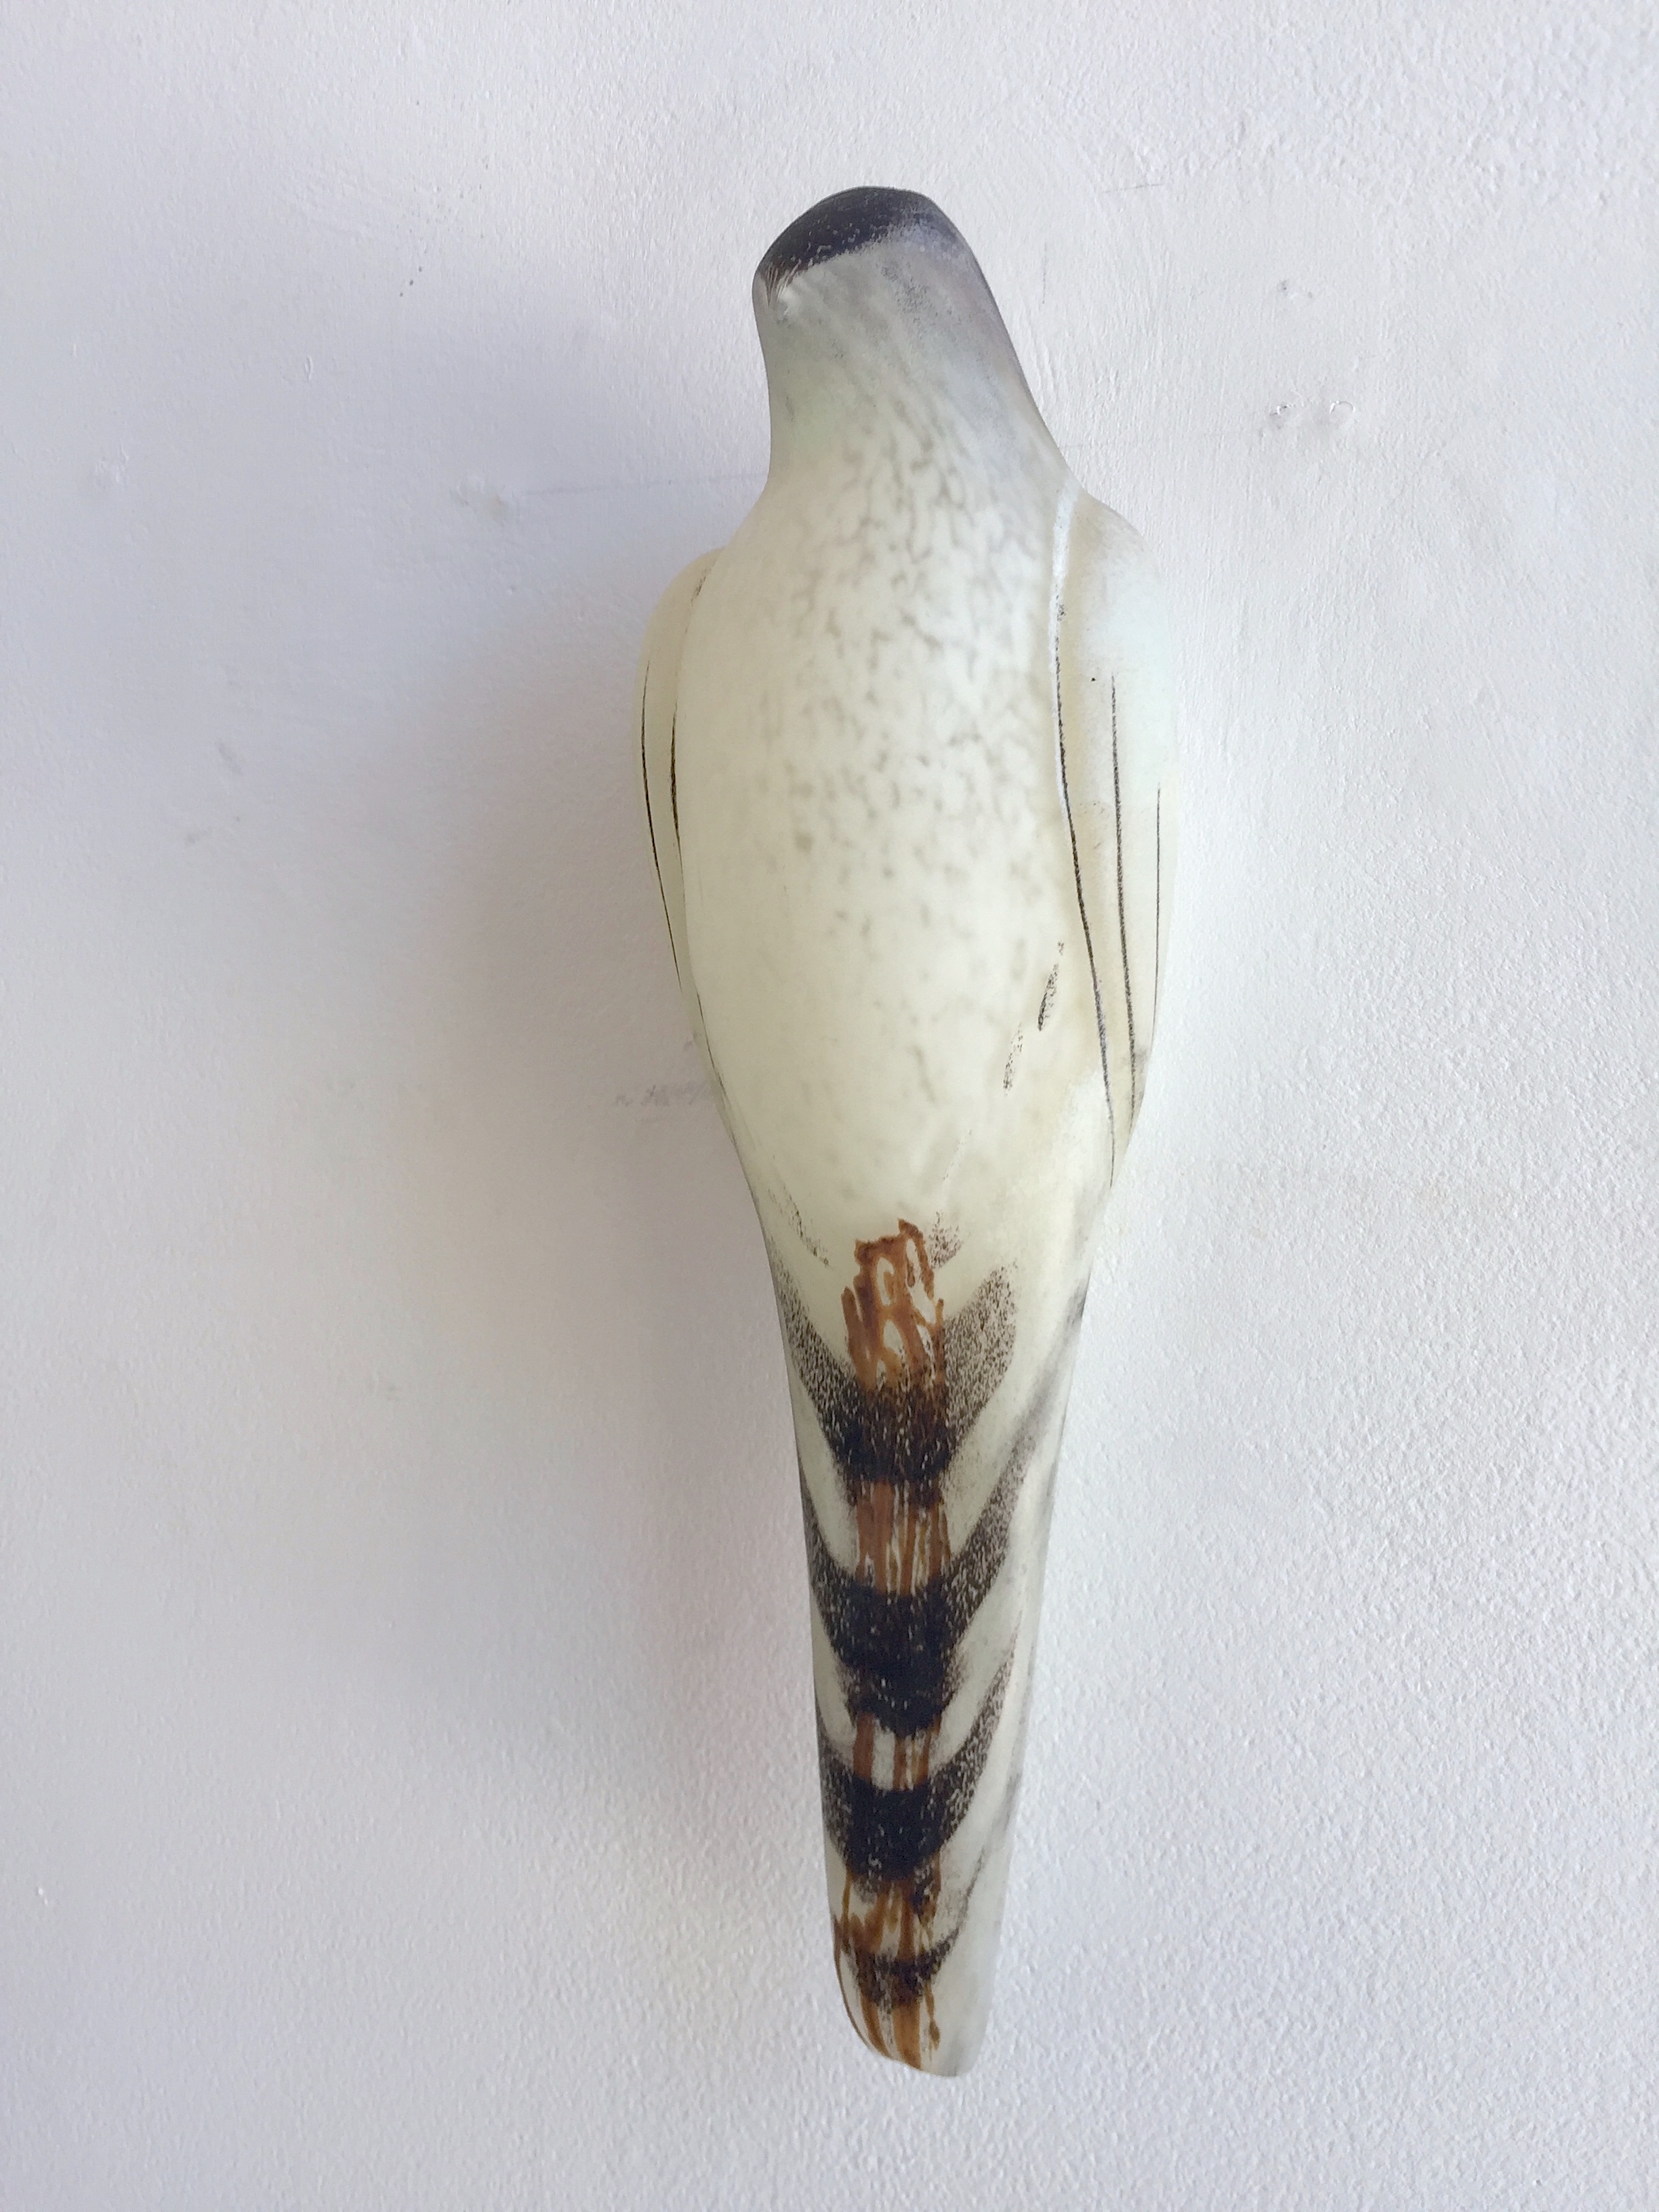  “White Lace Bird,” 2018   Hand blown pigmented glass  16 x 51⁄2 x 41⁄4 inches 